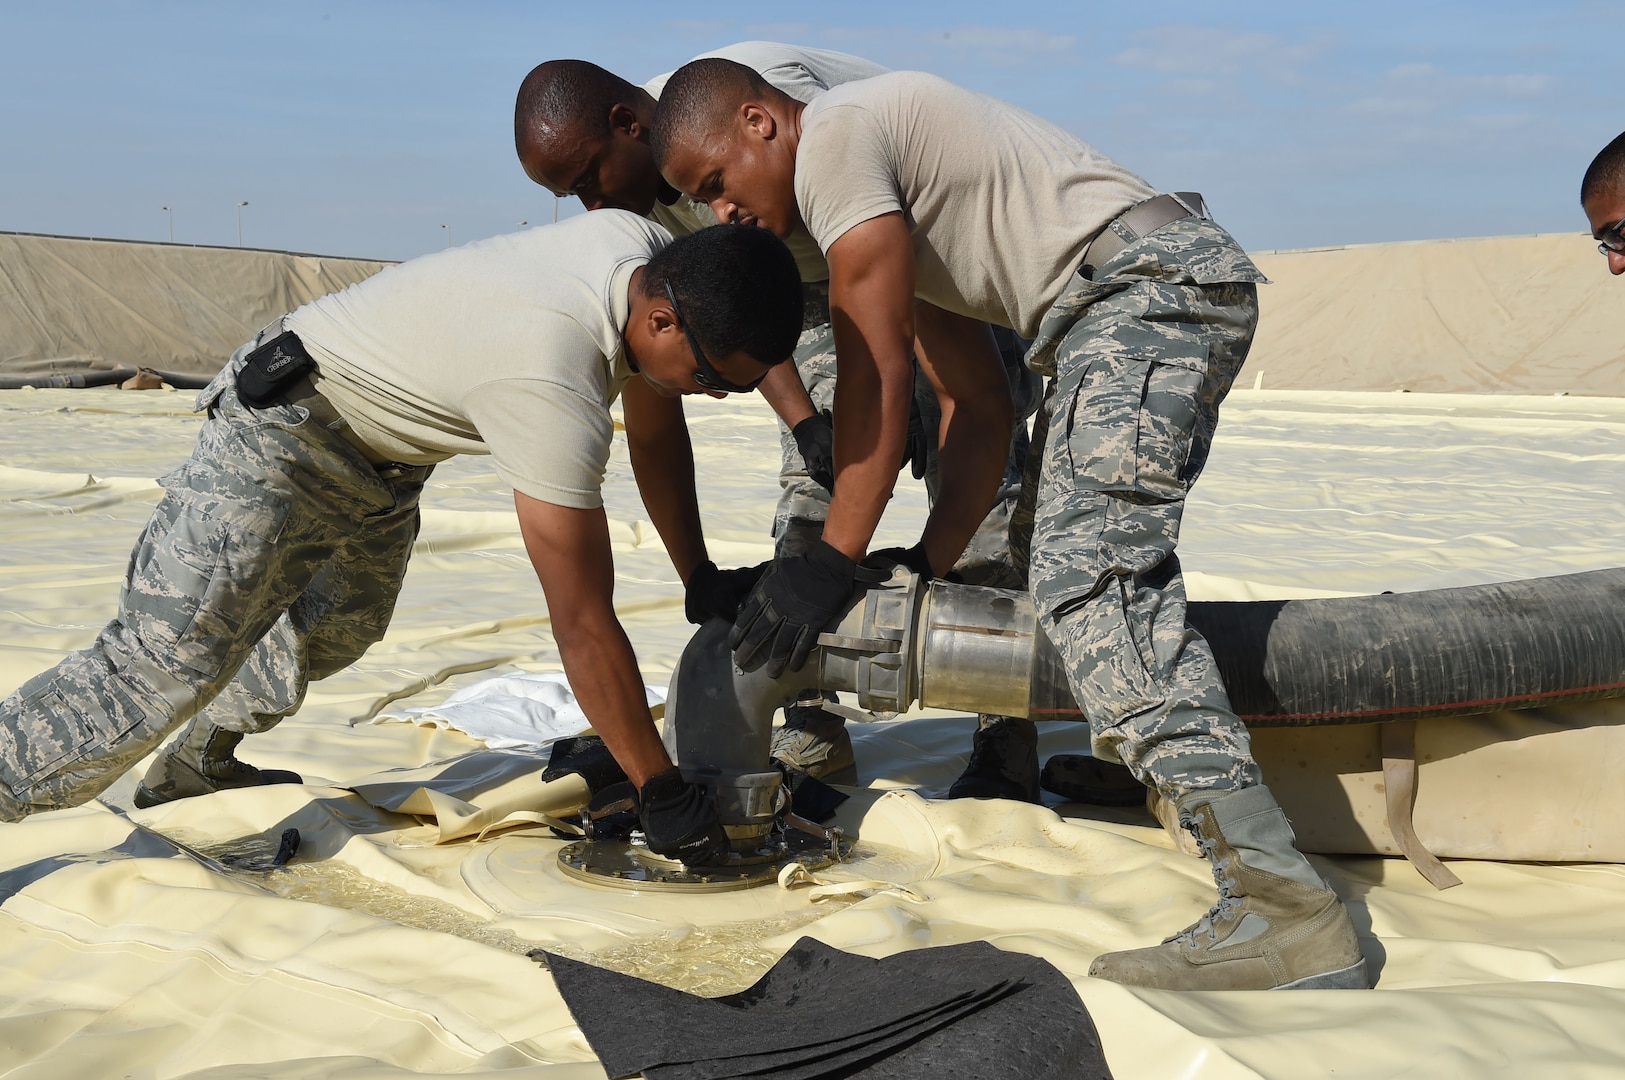 380th Fuels Management Flight members latch a fuel hose onto the new JP-8 jet fuel bladder that was installed at an undisclosed location in Southwest Asia, Nov. 9, 2016. This bladder will hold 210,000 gallons of jet fuel once fully connected, becoming part of a network of 27 similar bladders providing fuel to the 380th Air Expeditionary Wing flying mission. (U.S. Air Force photo by Tech. Sgt. Christopher Carwile)